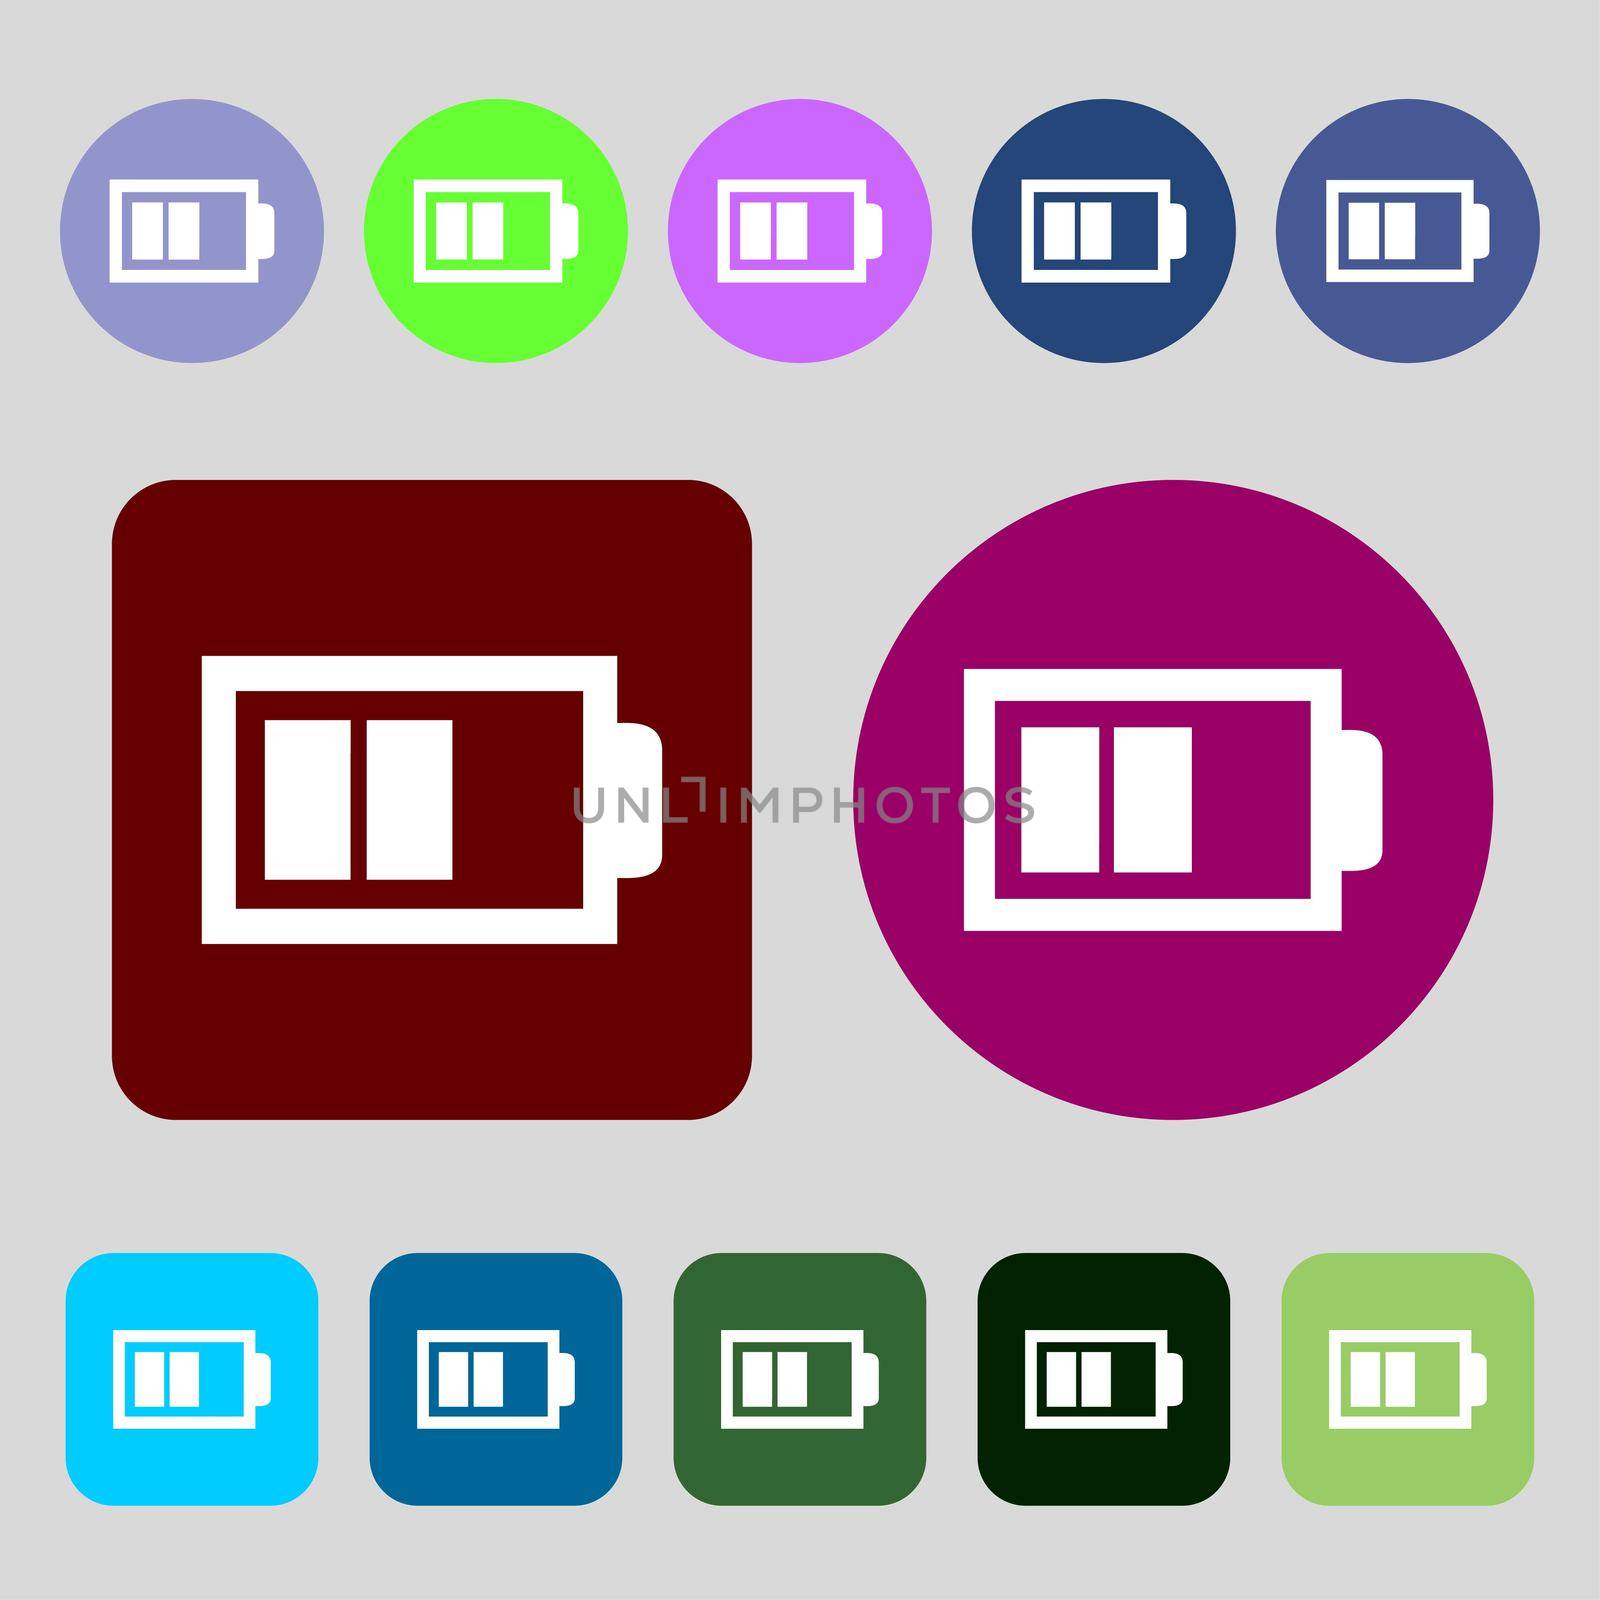 Battery half level sign icon. Low electricity symbol.12 colored buttons. Flat design. illustration